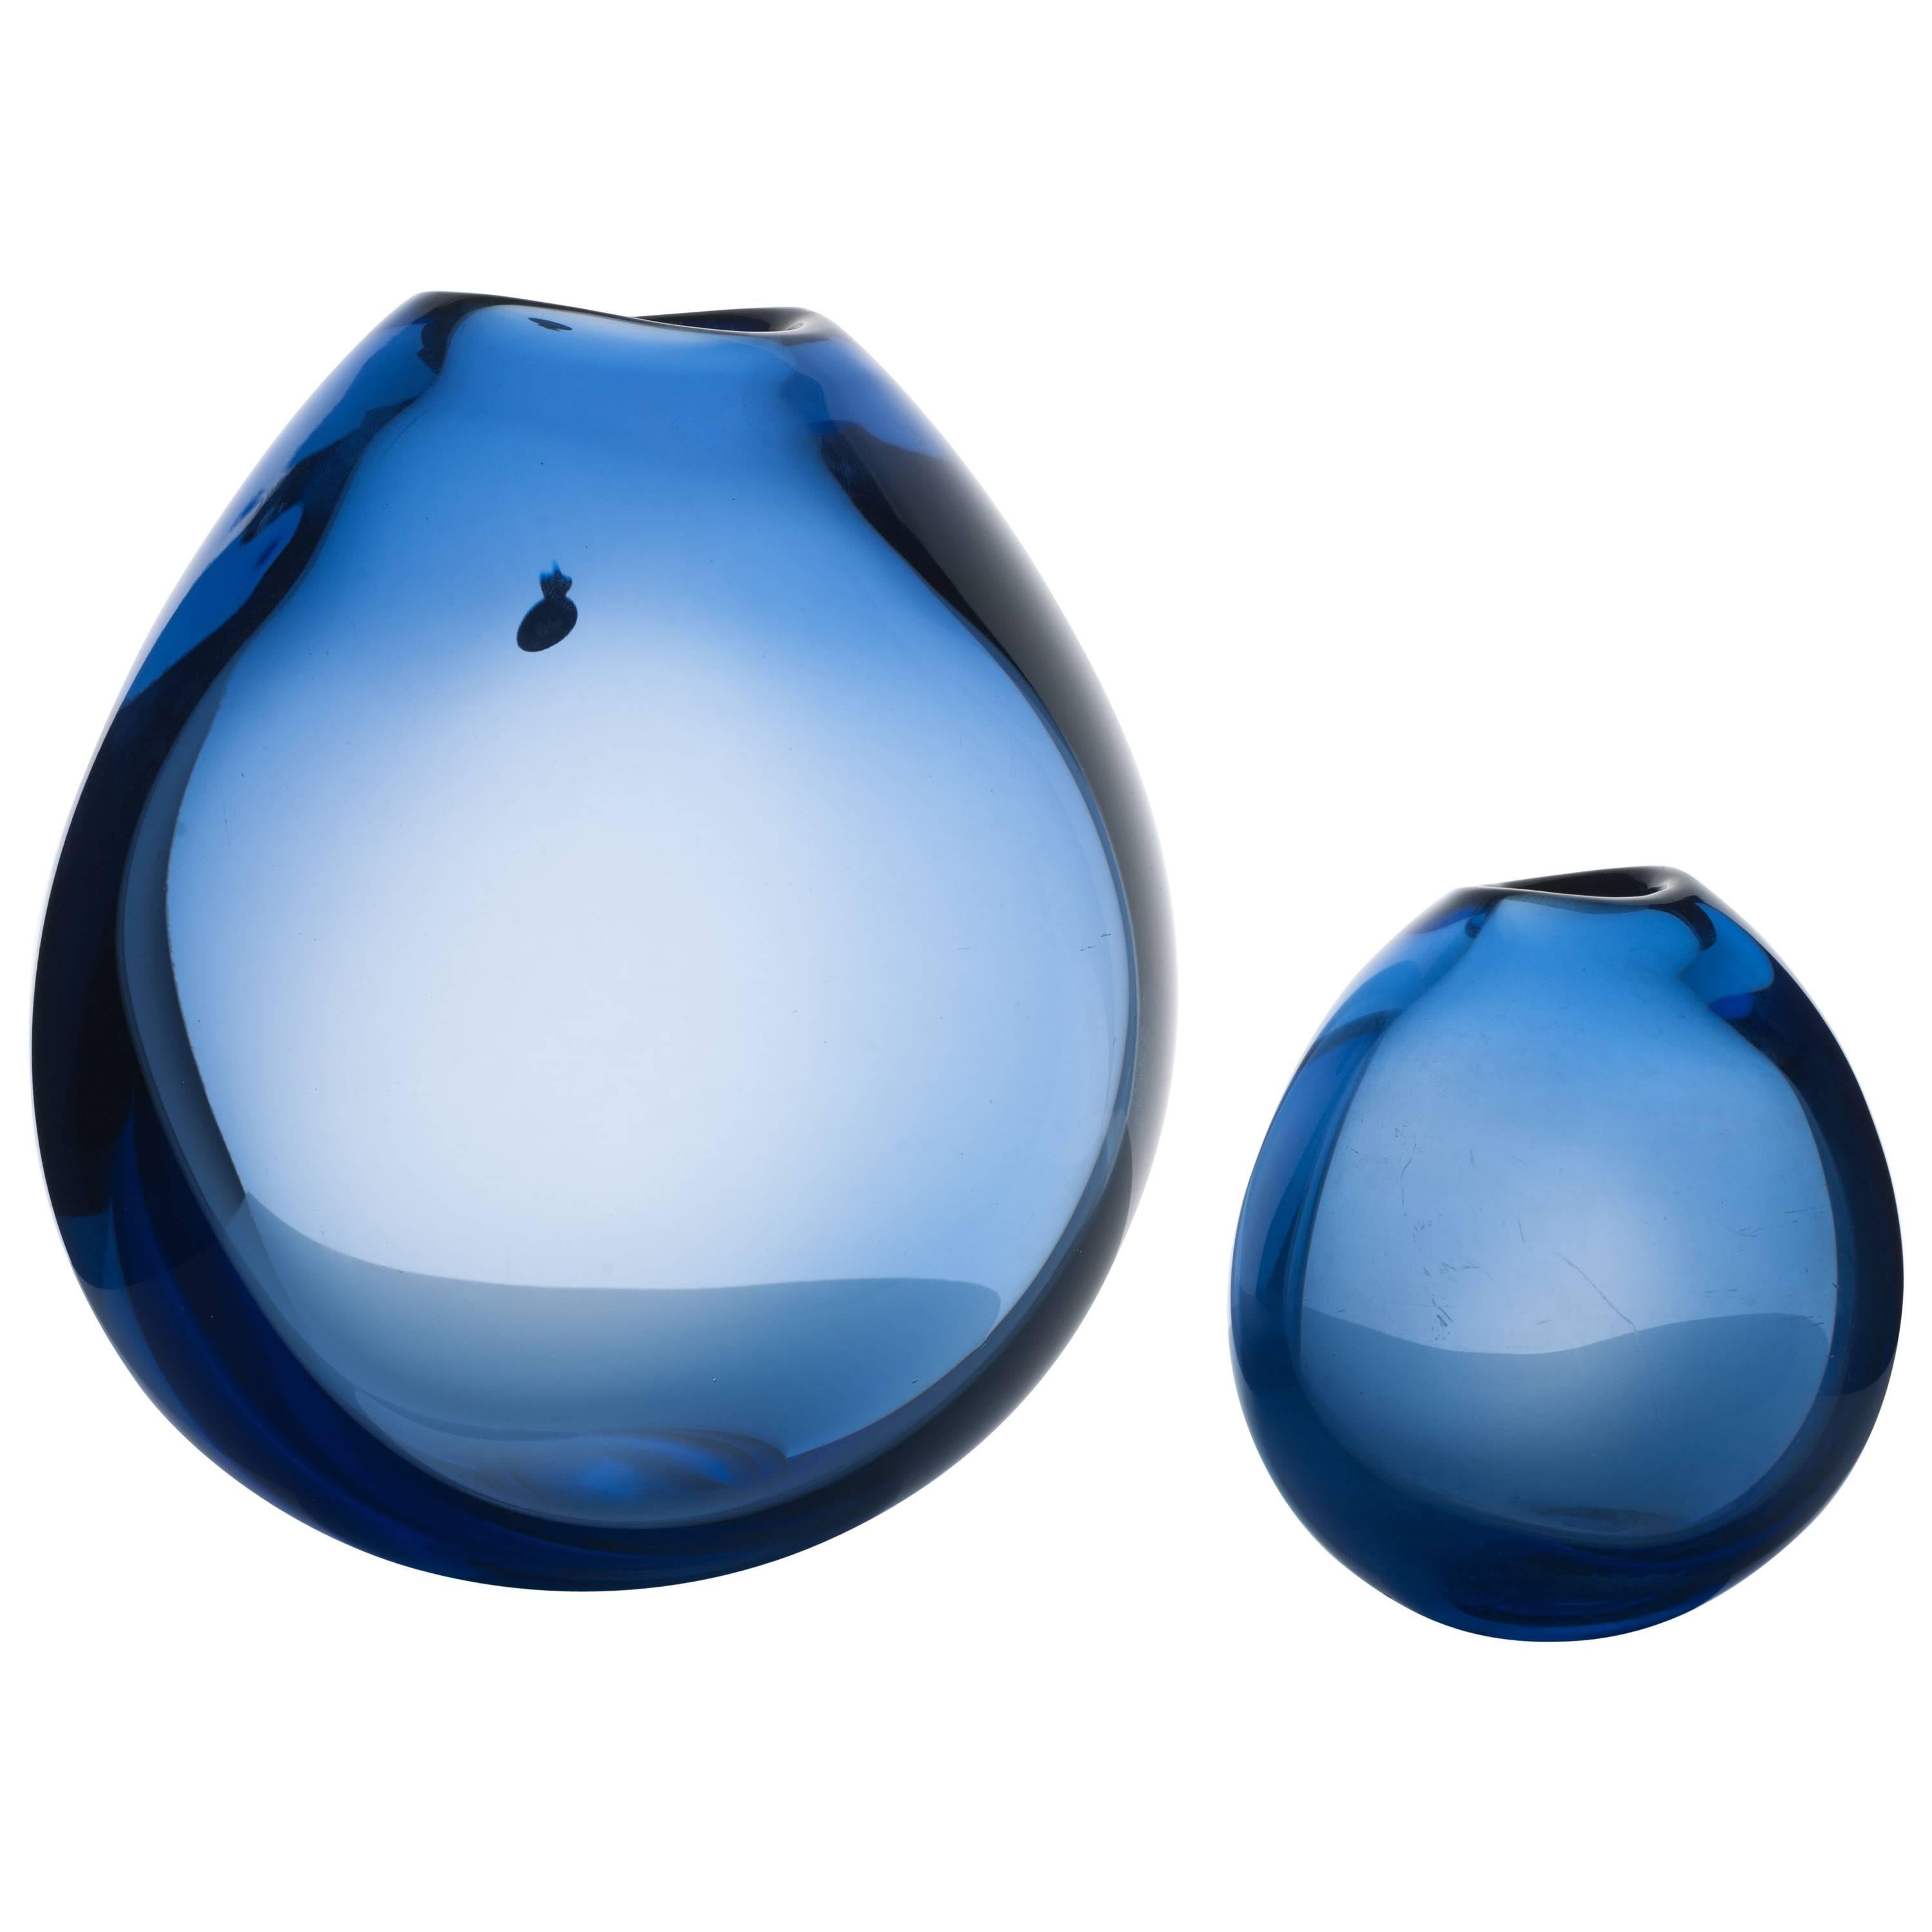 Sapphire Blue Mouth Blown Drop Vases by Per Lütken for Holmegaard, 1960s